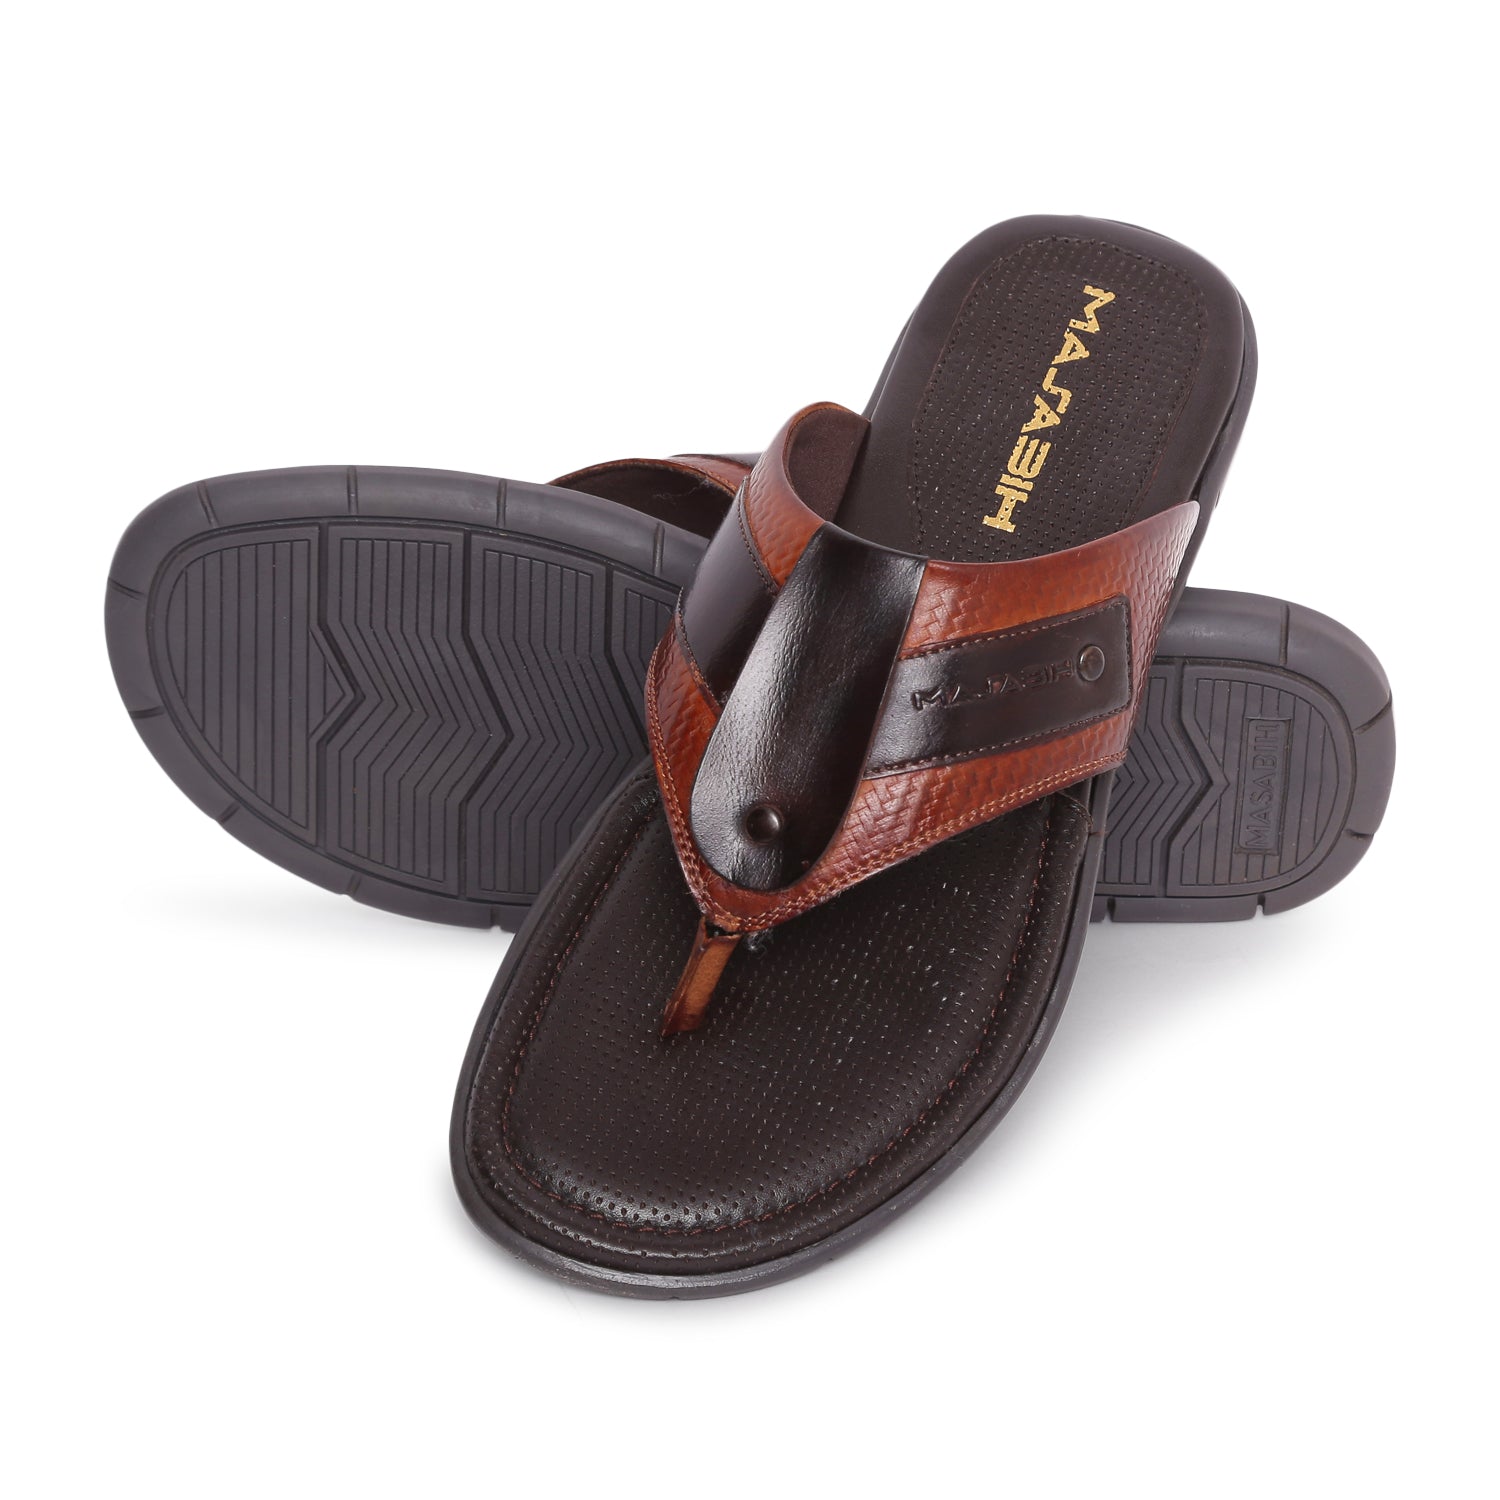 MASABIH Geniune Leather Soft Weavy Print Tan / Brown Color modern thong sandals for Mens